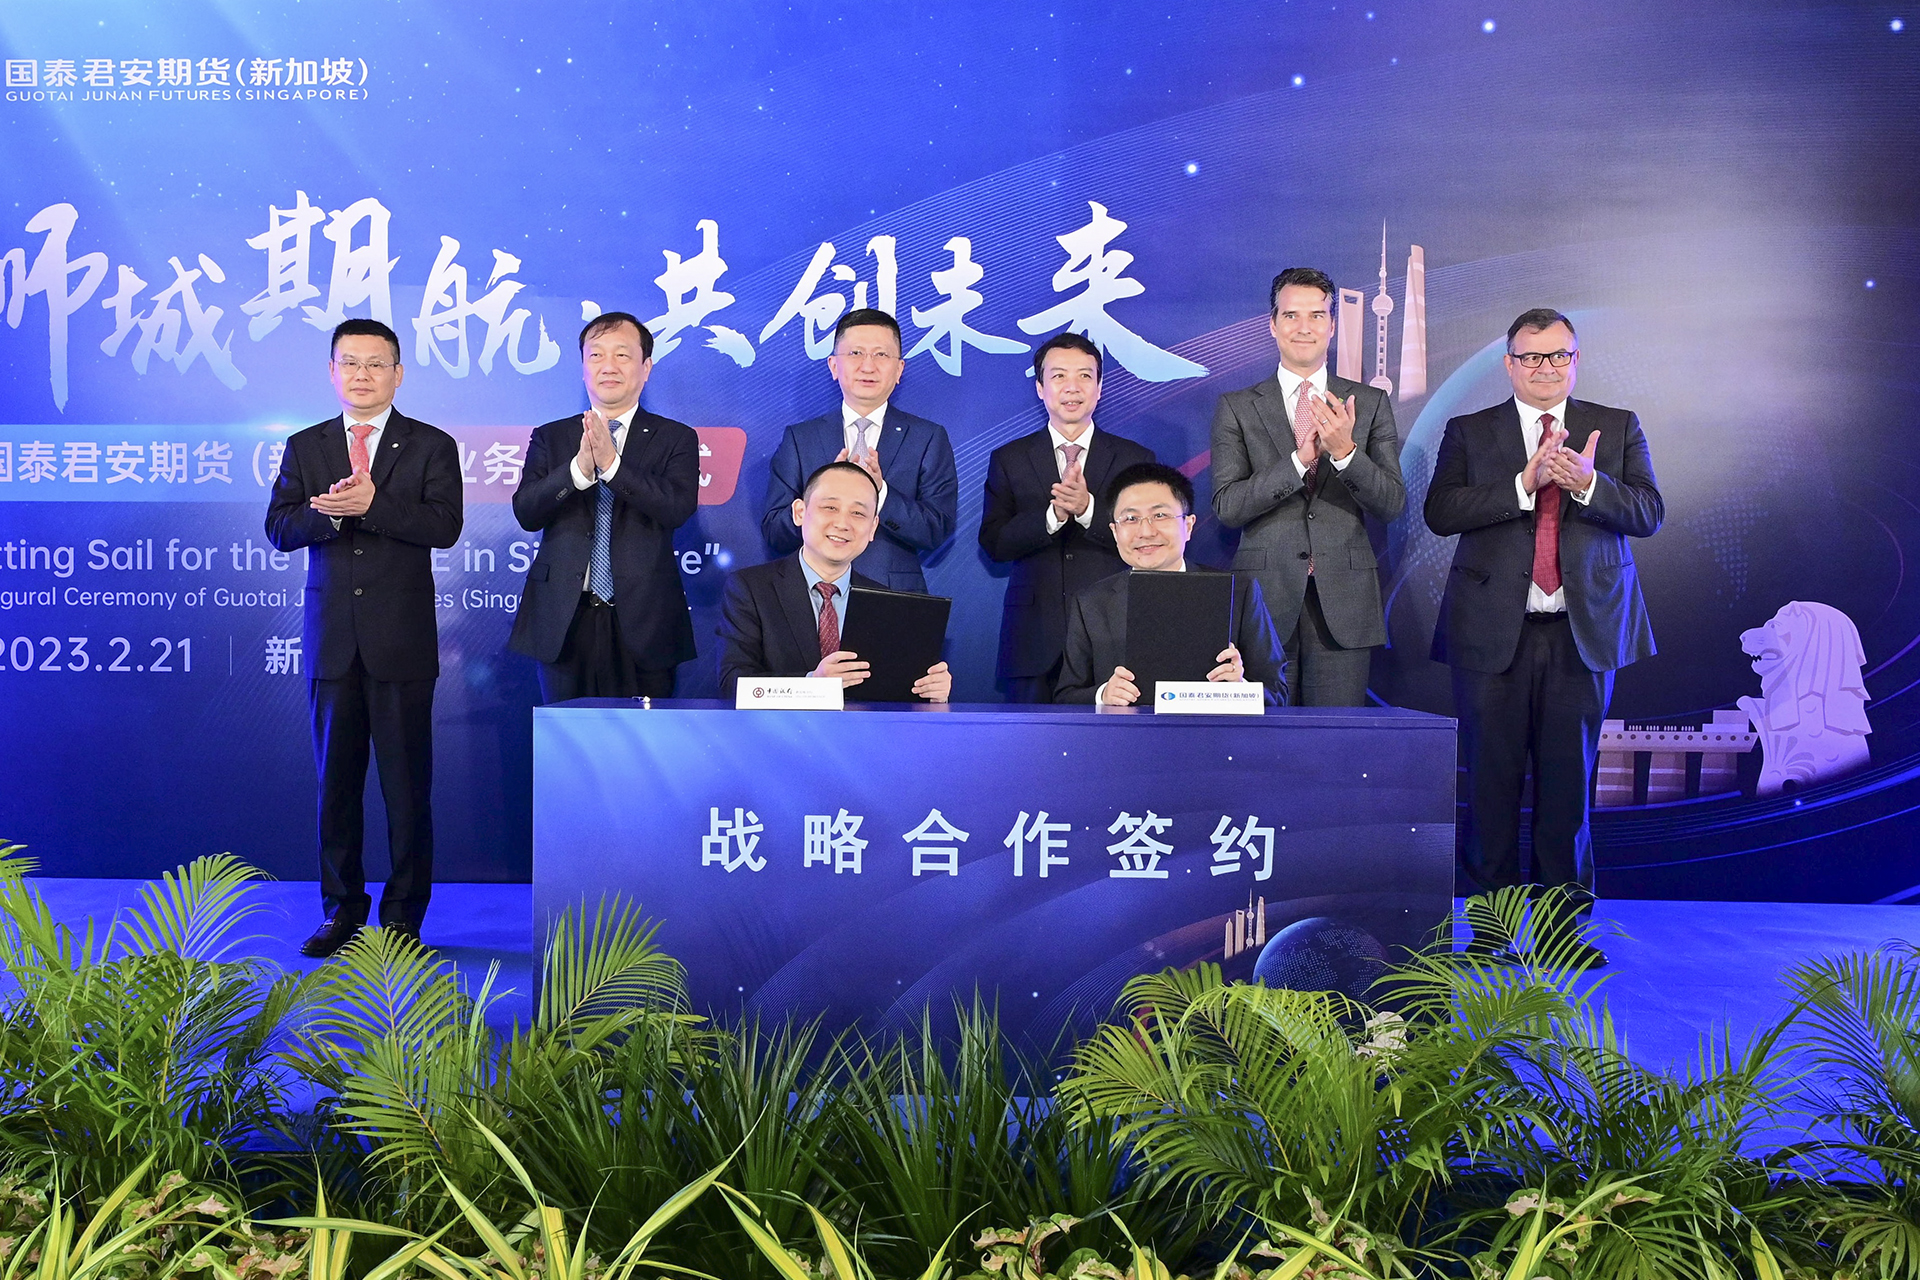 Guotai Junan Futures Singapore Co., Ltd. started its business operation and signed strategic cooperation with Bank of China Singapore Branch and Shengbao Bank ...535 / author:Guotai Jun'an / source:Guotai Jun'an